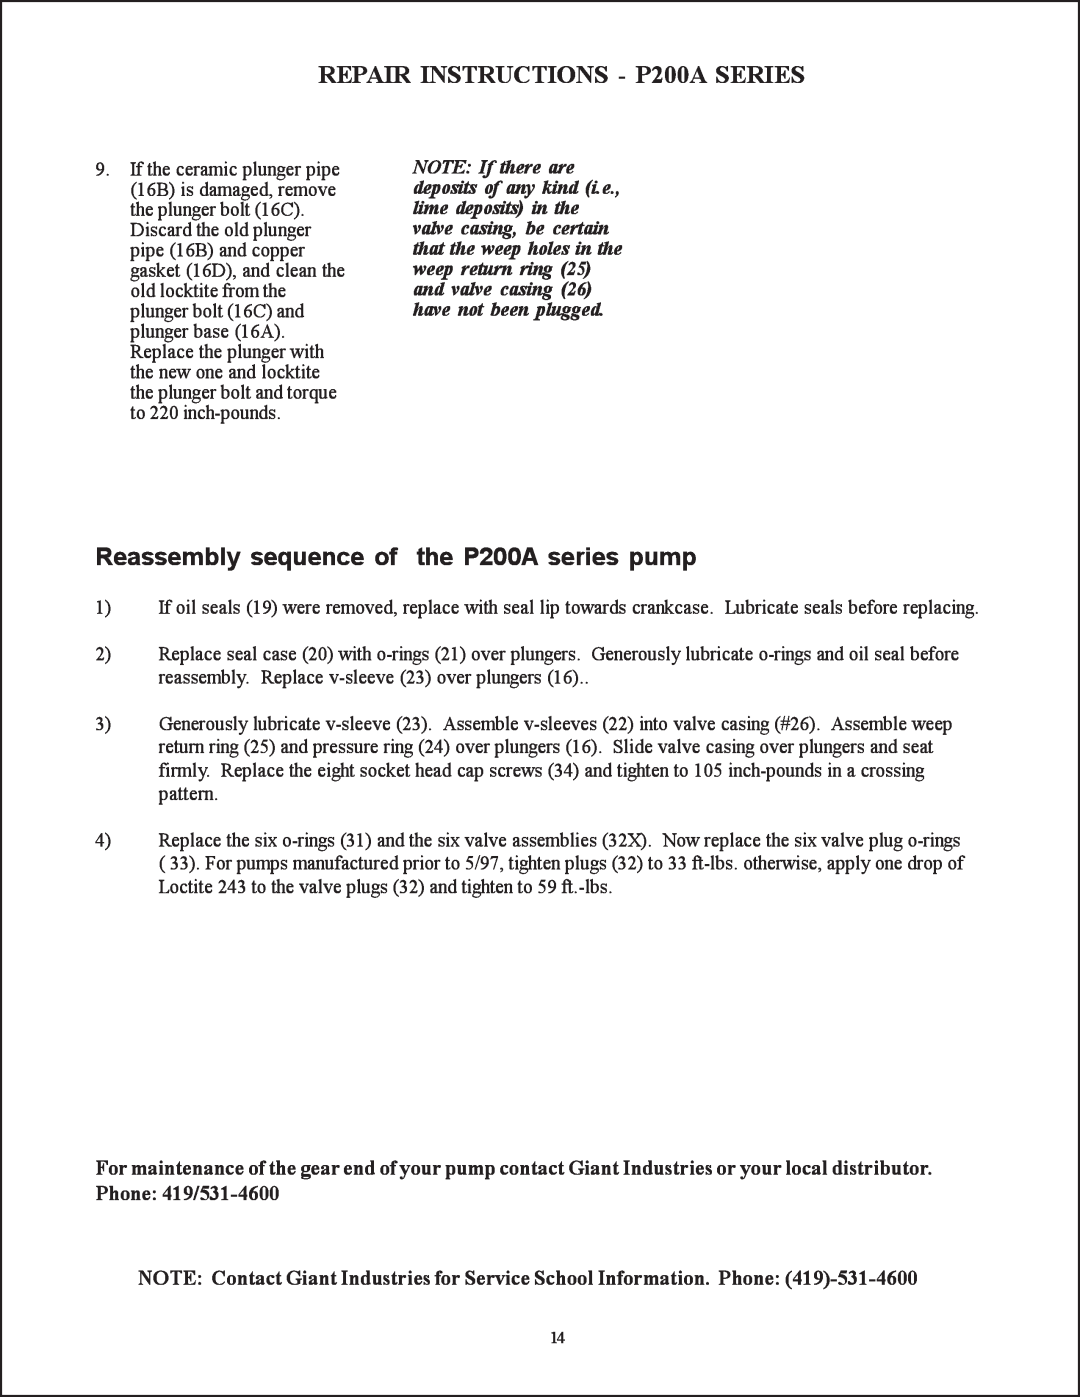 Giant operating instructions Reassembly sequence of the P200A series pump, REPAIR INSTRUCTIONS - P200A SERIES 